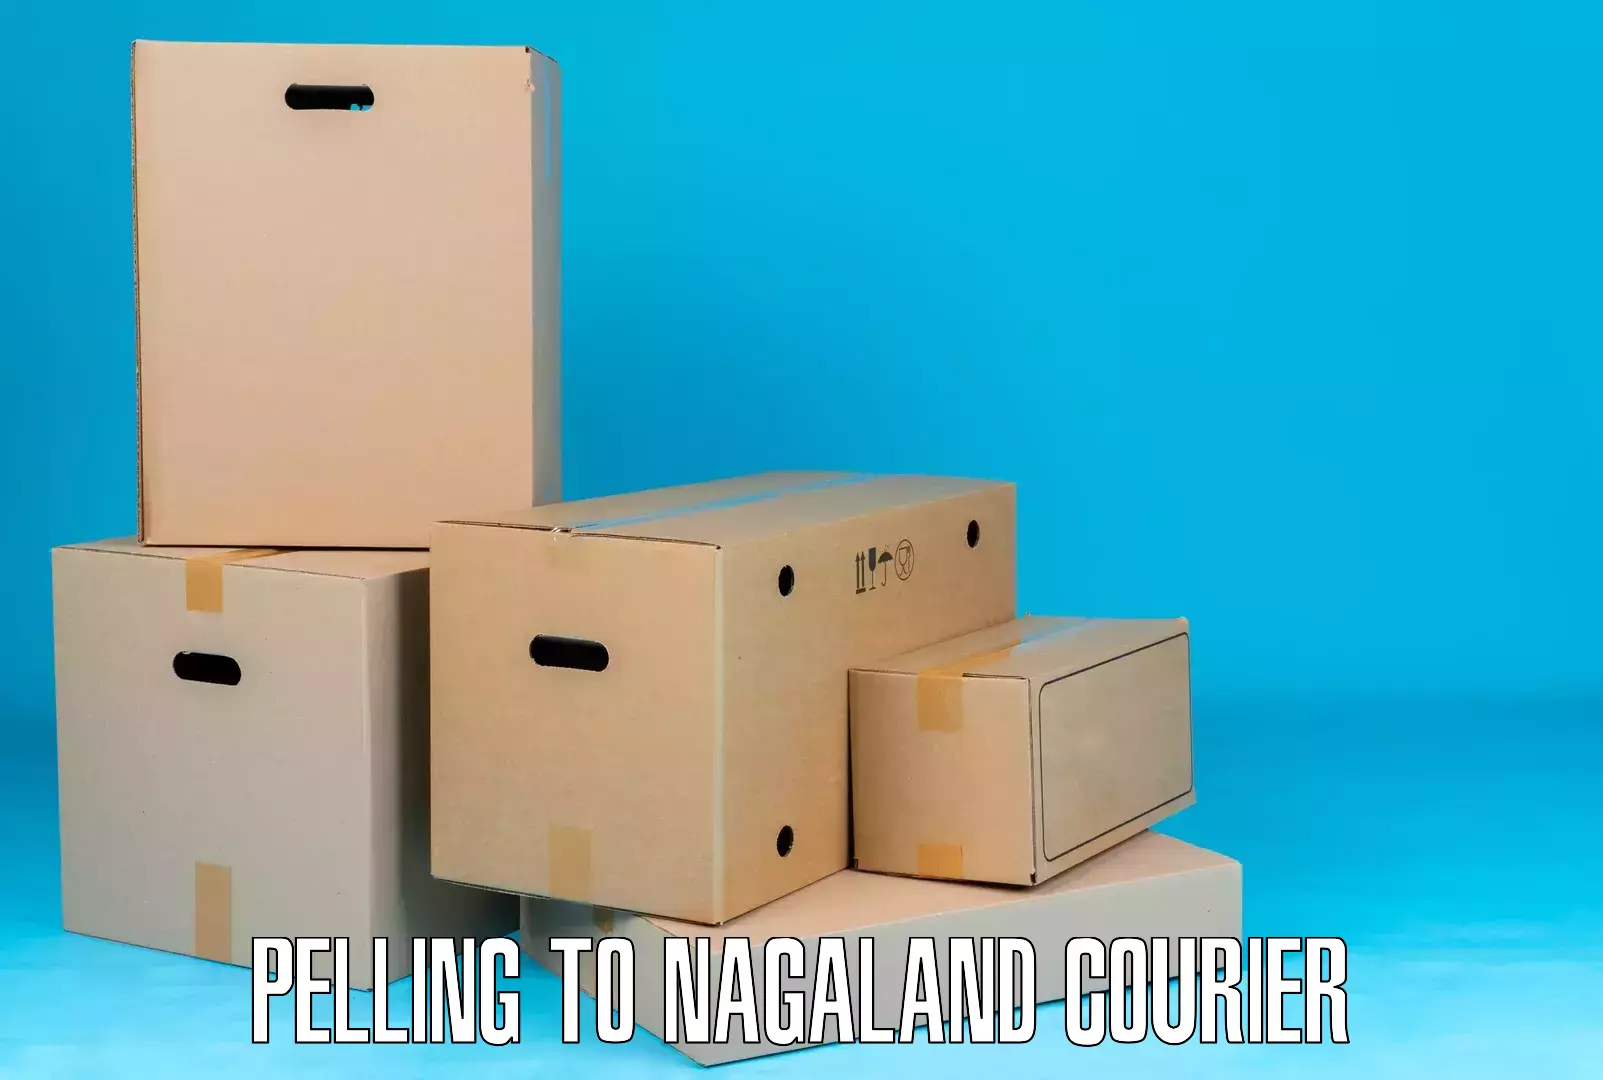 Quality courier partnerships Pelling to Nagaland